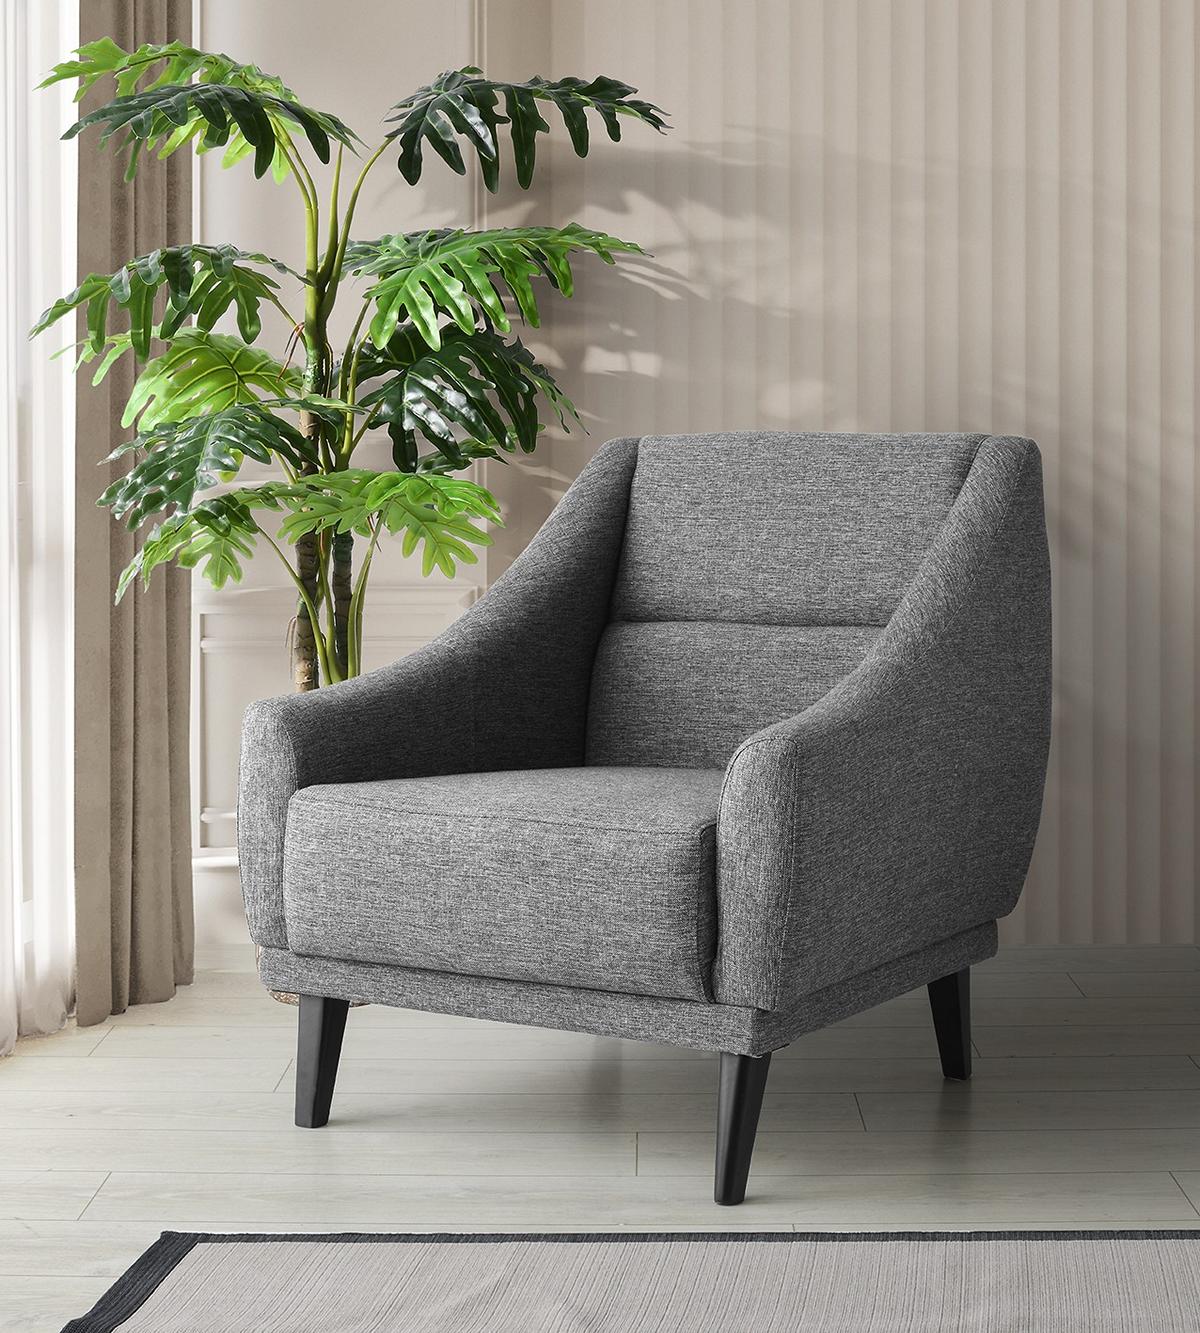 Armchair wing chair cocktail armchair fabric fabric armchair grey seat upholstery